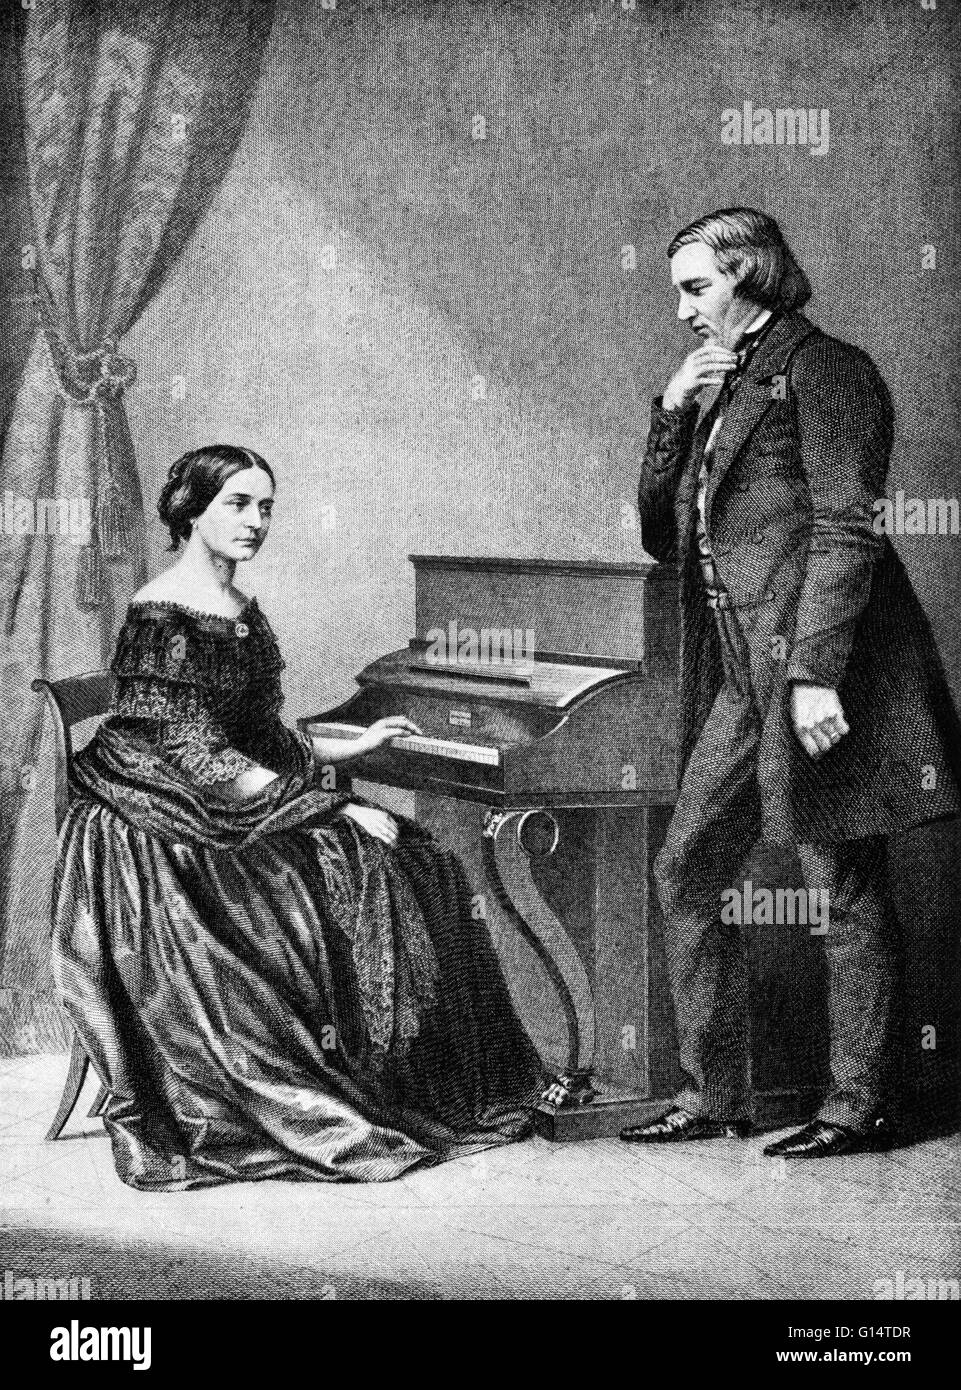 Robert Schumann (June 8, 1810 - July 29, 1856) was a German composer and music critic. He is regarded as one of the greatest composers of the Romantic era. Schumann left the study of law to return to music, intending to pursue a career as a virtuoso piani Stock Photo